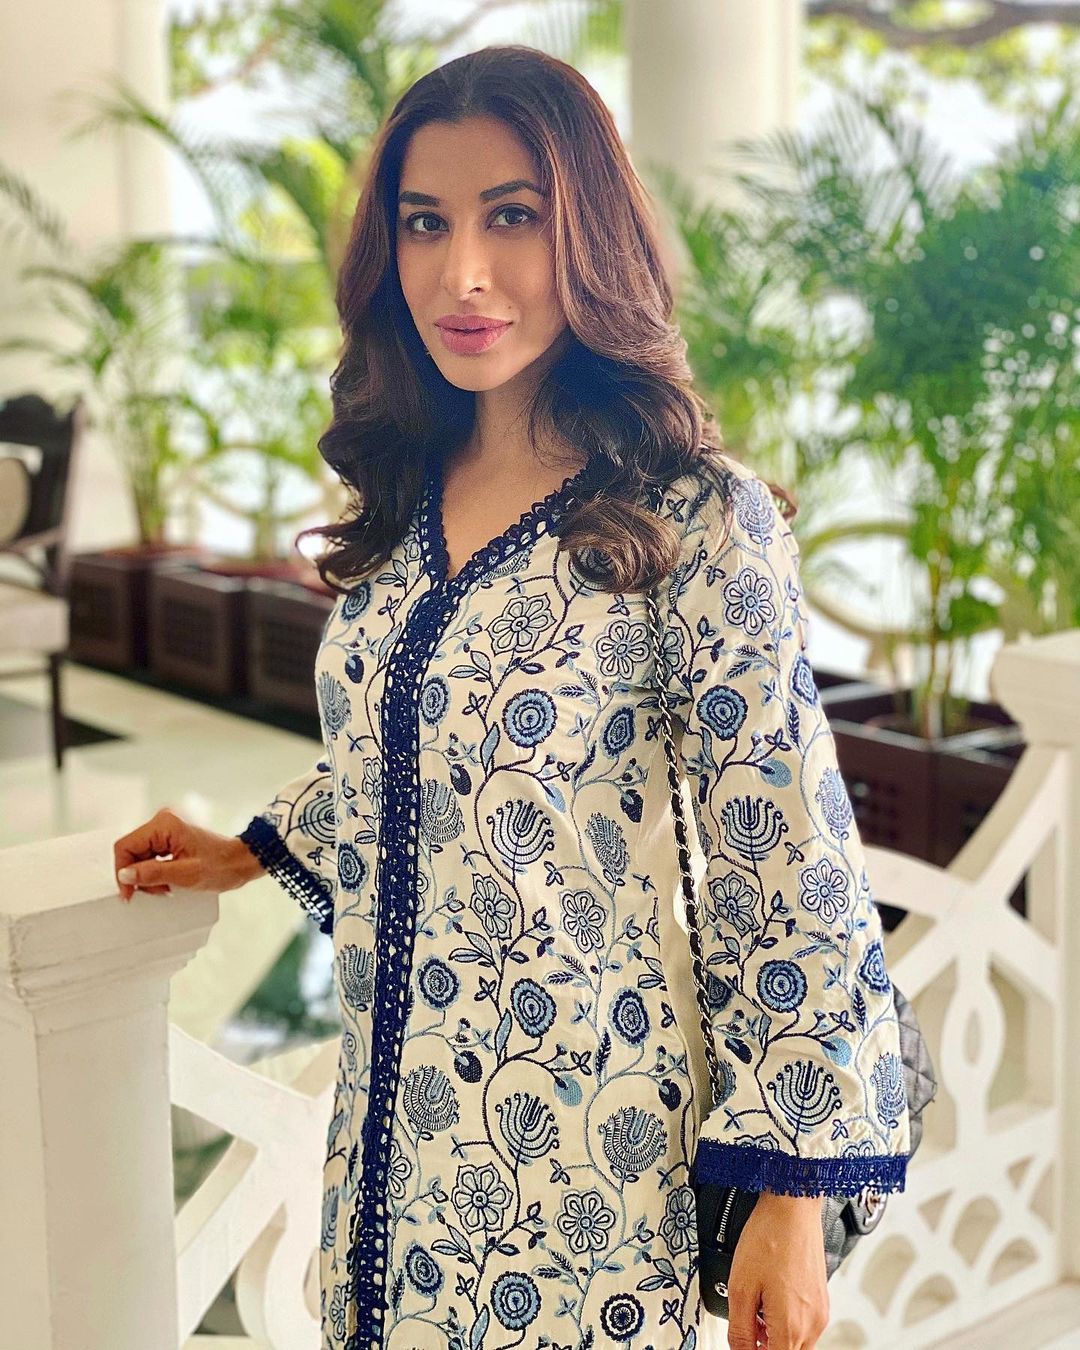 Sophie Choudry looks charming in the floral kurta.